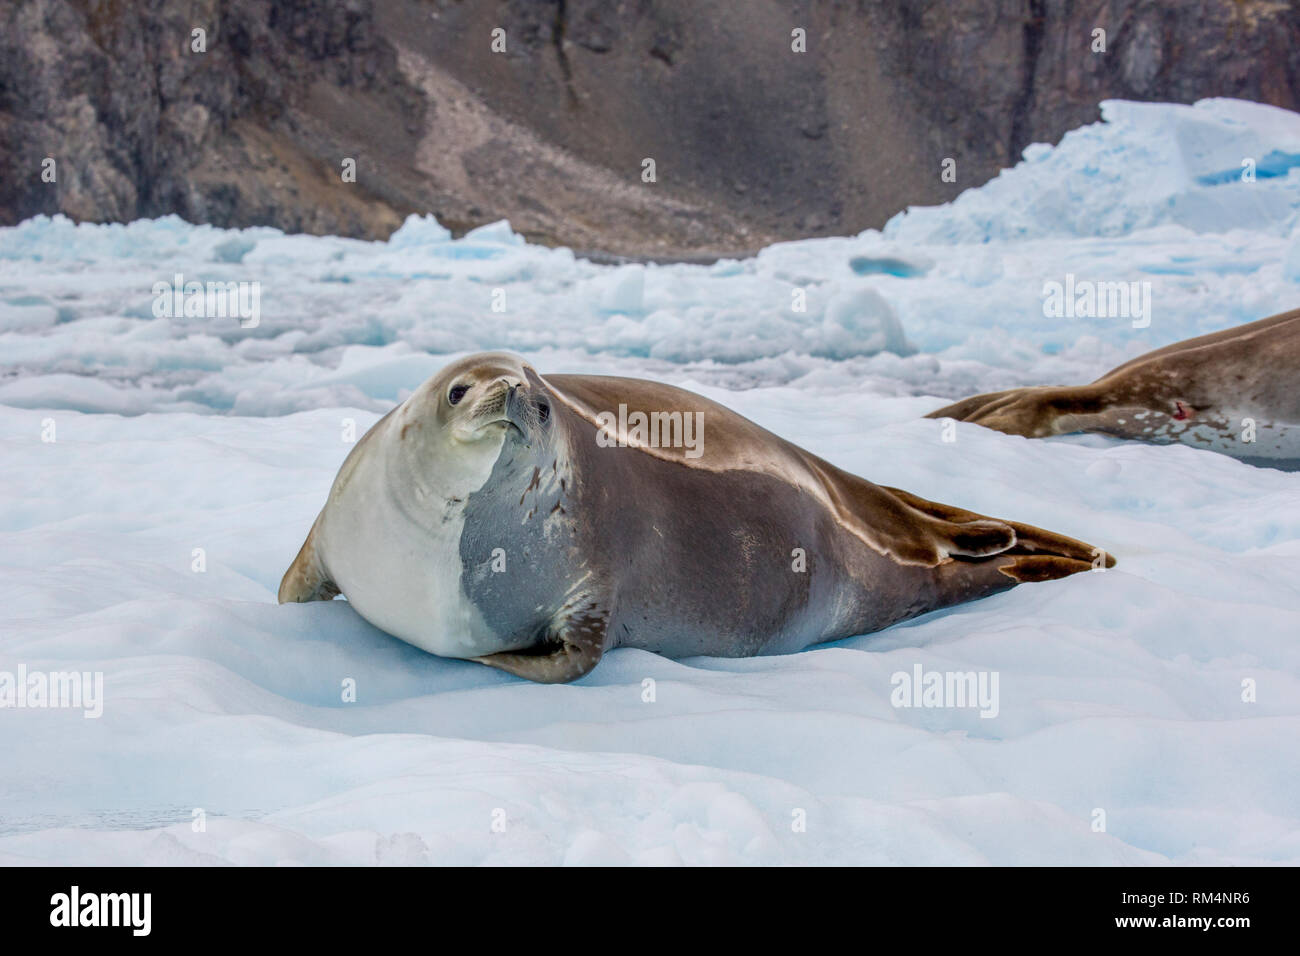 Crabeater seal (Lobodon carcinophagus) resting on ice. Despite the name, it does not eat crabs but uses specialised teeth to sieve krill out of the wa Stock Photo